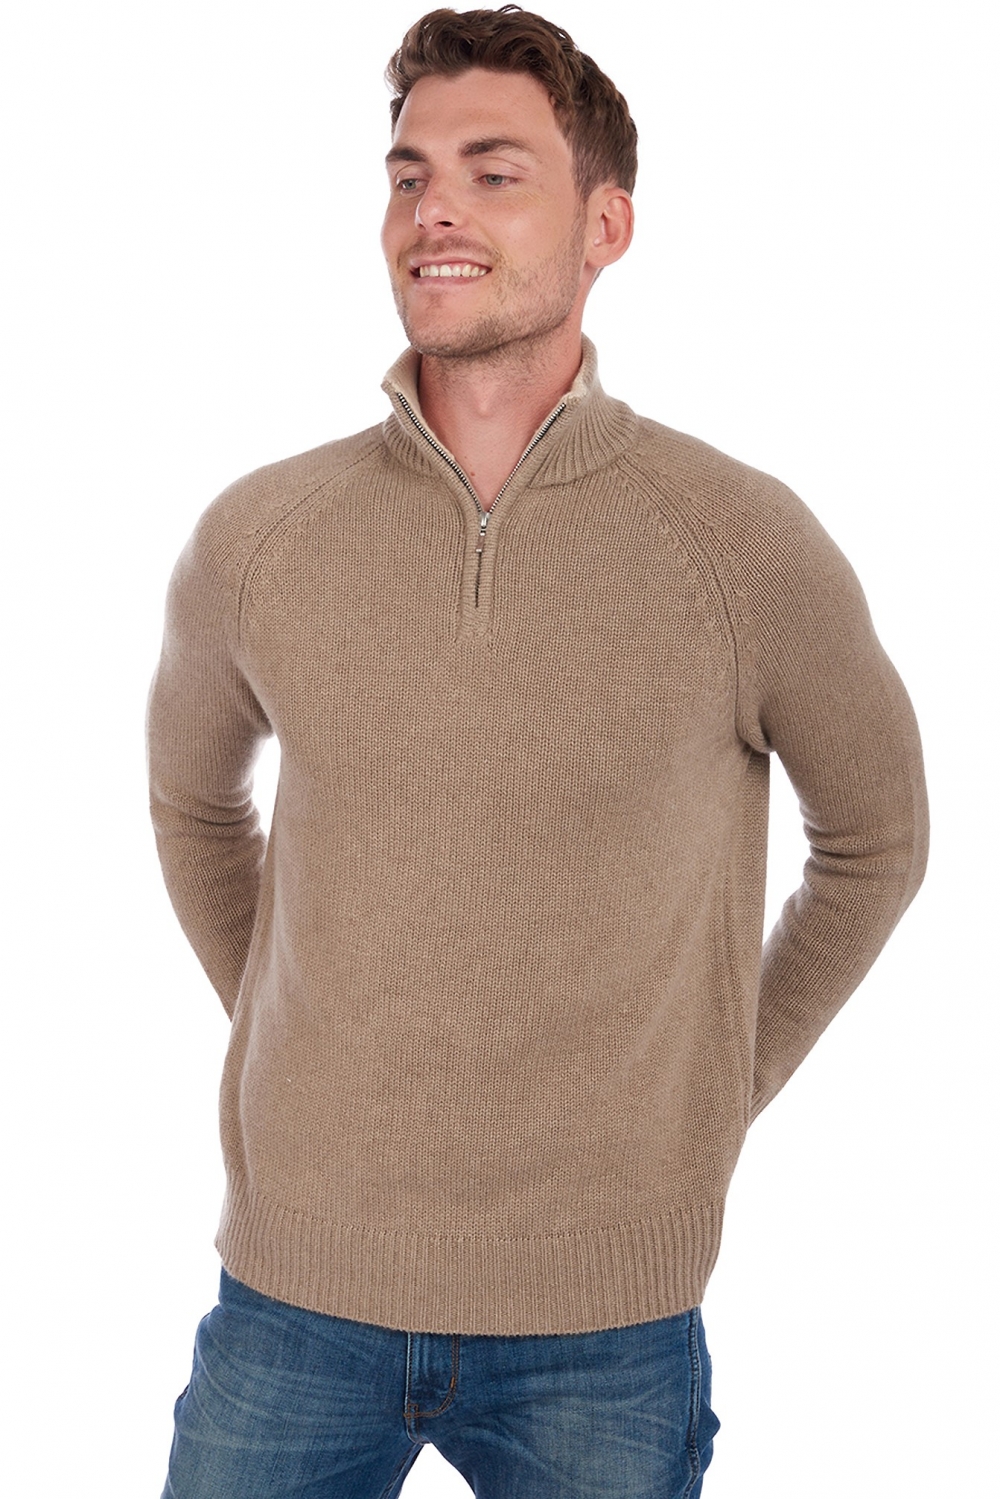 Cashmere uomo polo angers natural brown natural beige 2xl